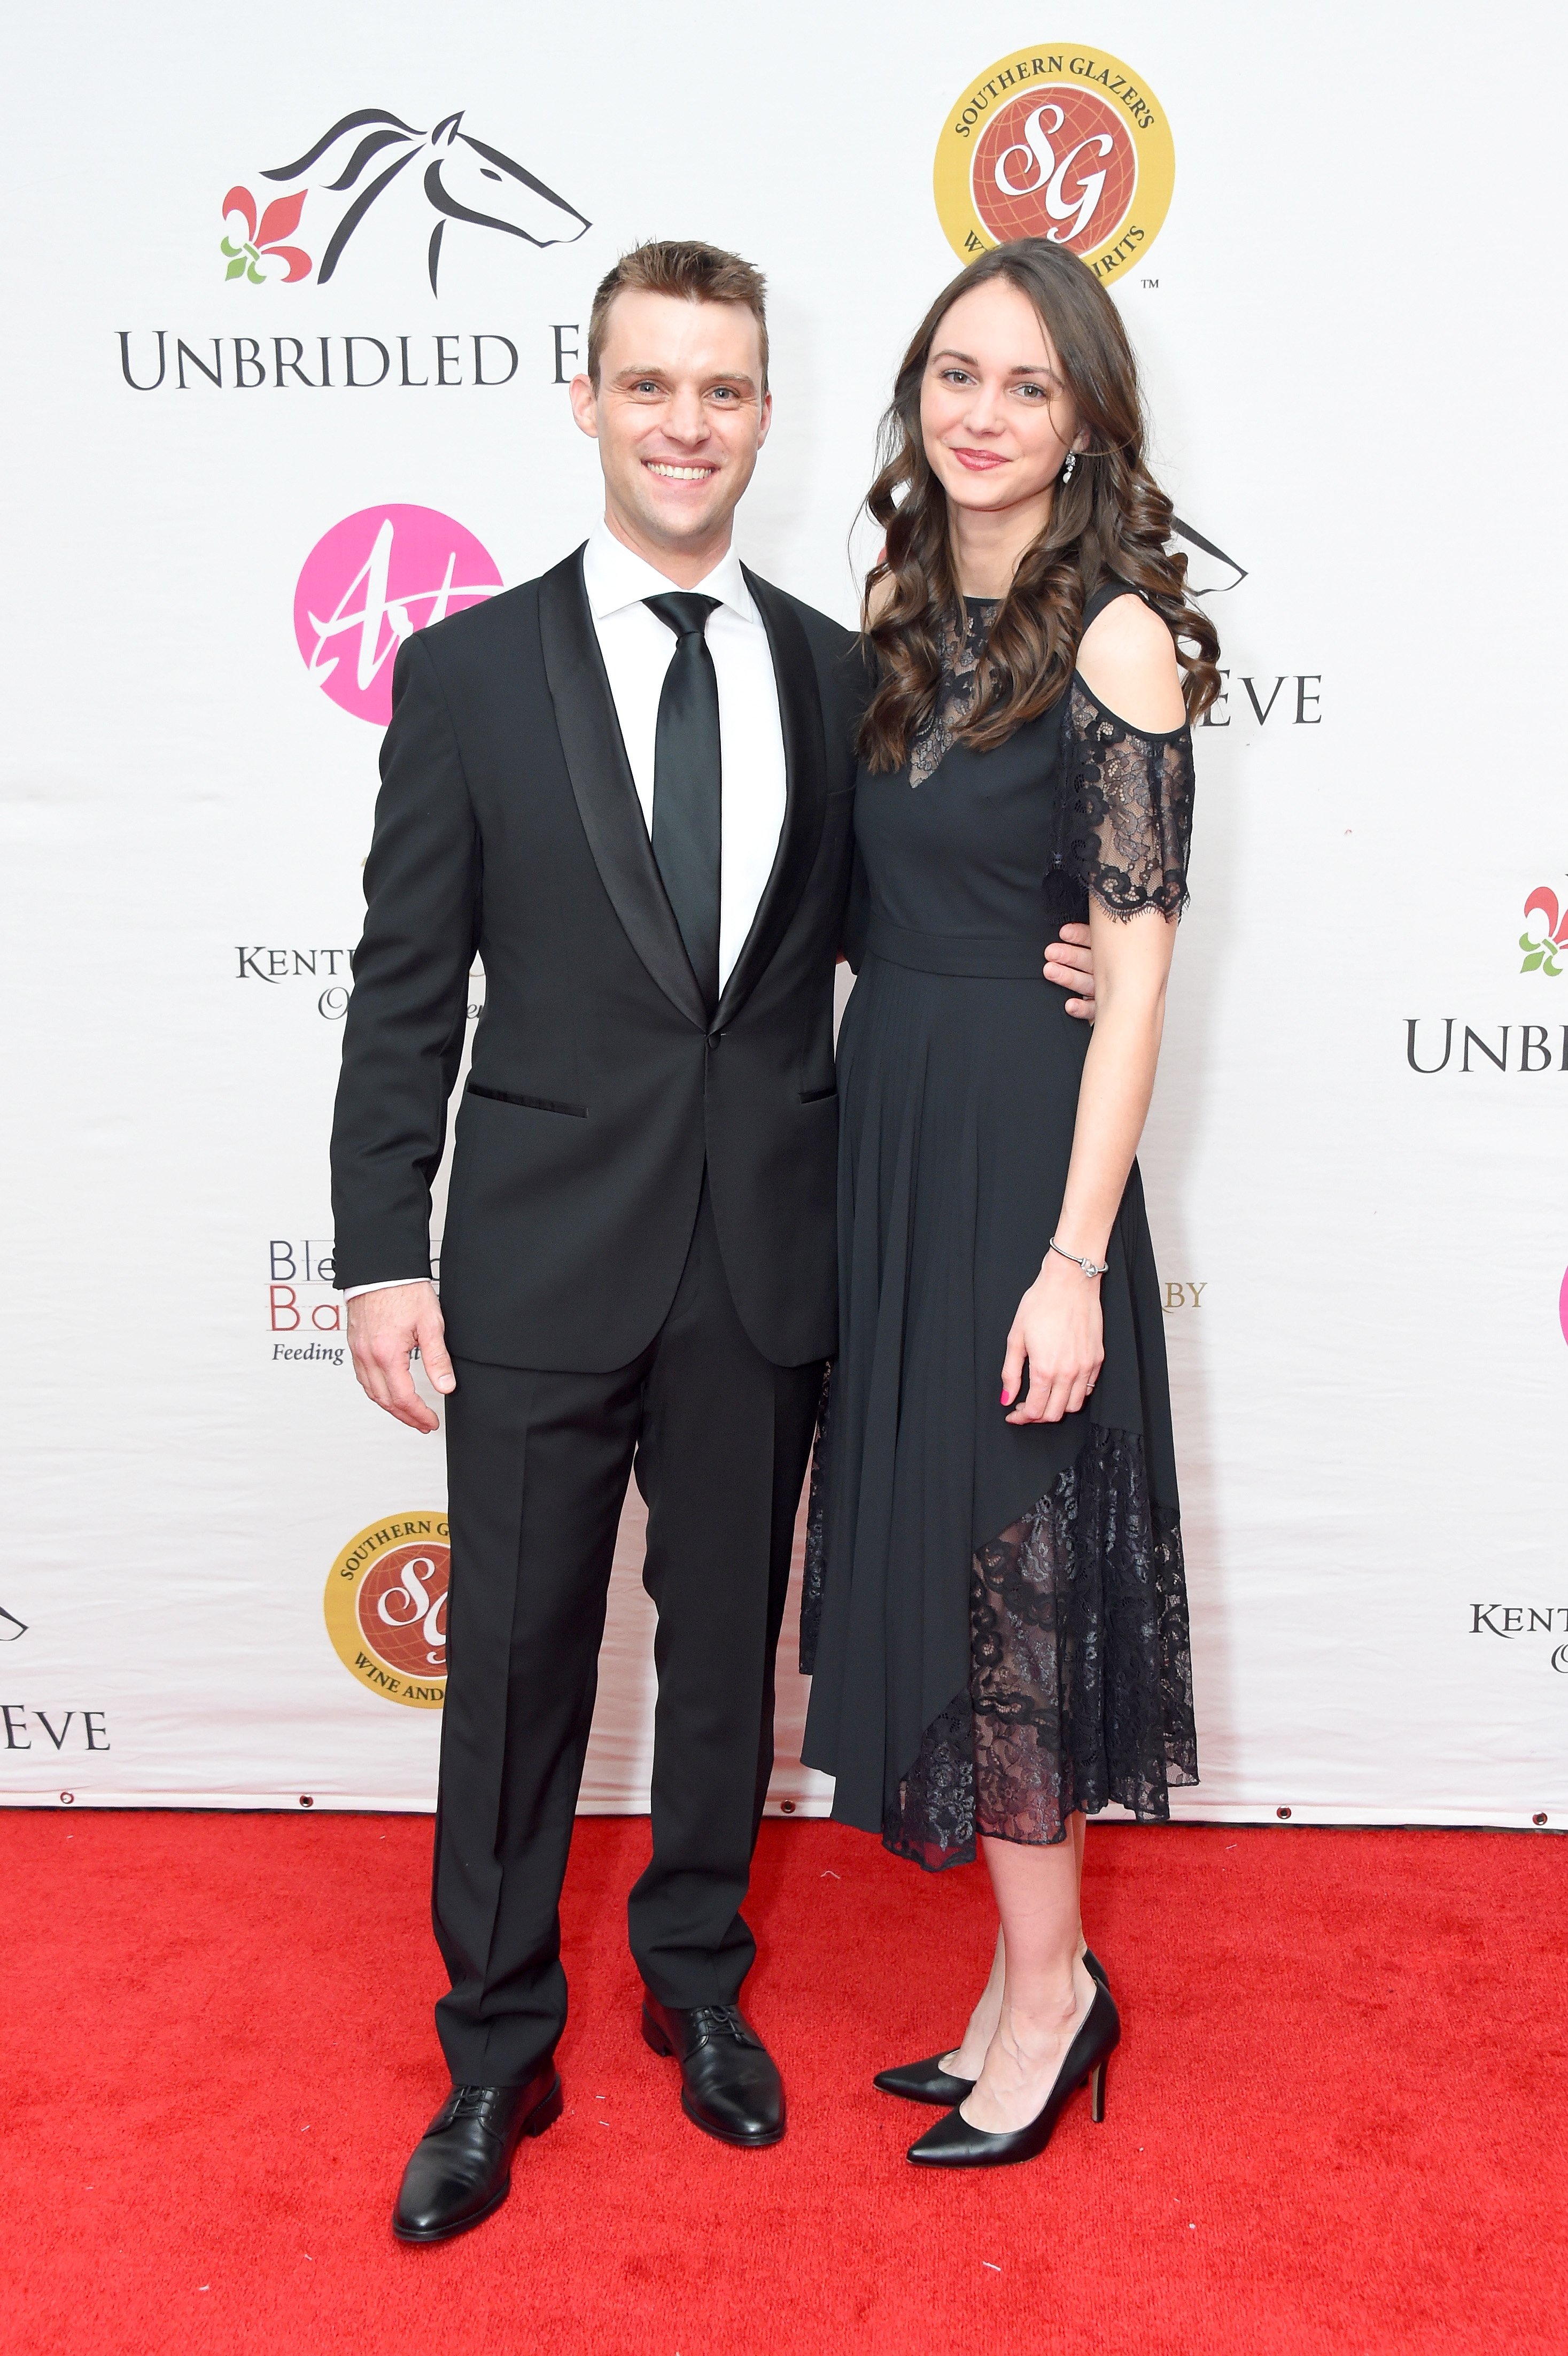 Jesse Spencer and Kali Woodruff Carr attend the Unbridled Eve Gala during the 144th Kentucky Derby on May 4, 2018, in Louisville, Kentucky. | Source: Getty Images